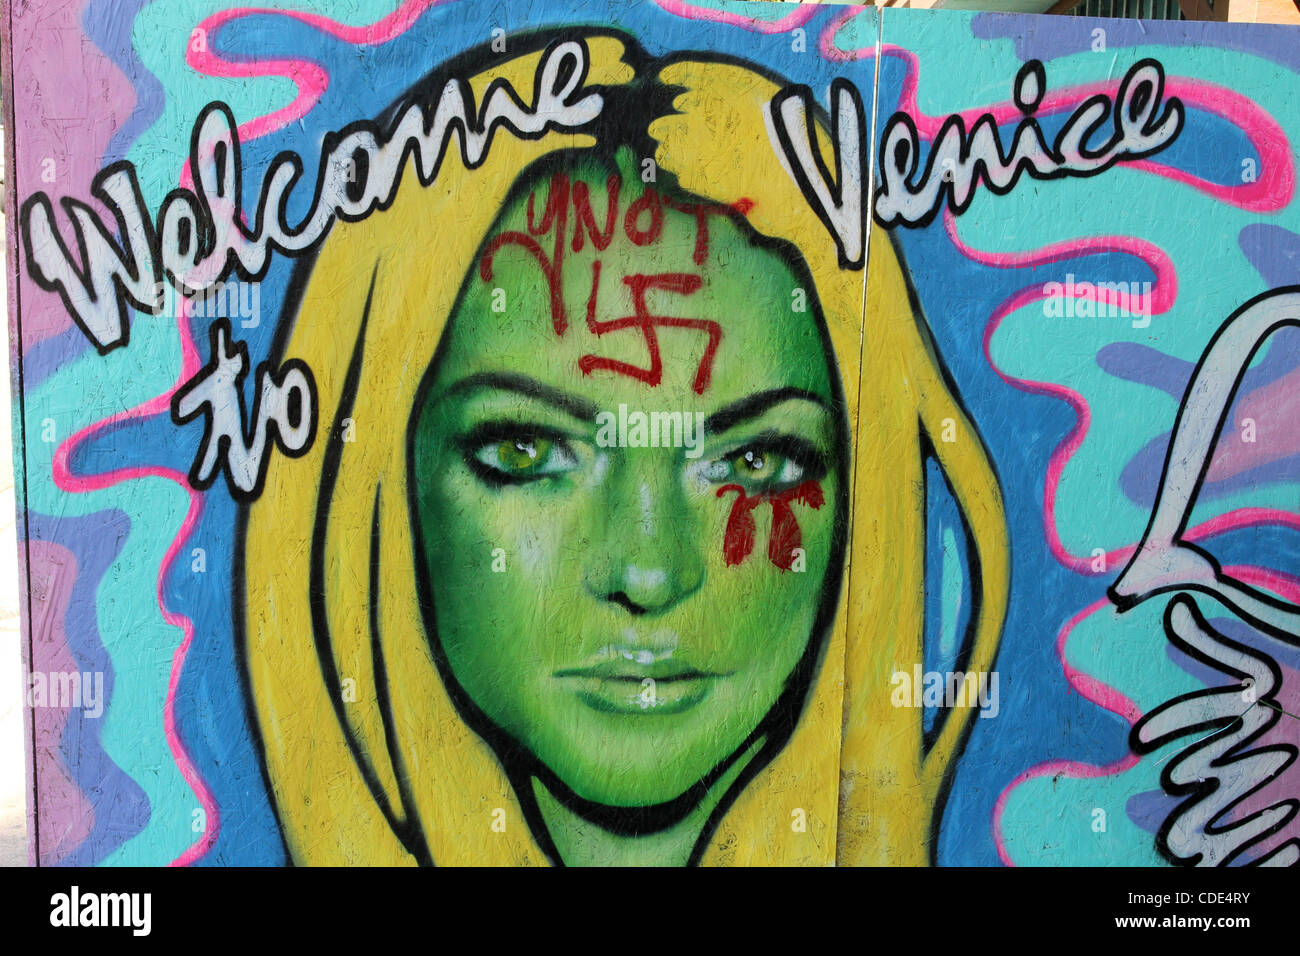 Feb. 3, 2011 - Venice, California, U.S - A man walks past Venice artist Jules MuckÃ”s Ã’Welcome to VeniceÃ“ painting of Lindsay Lohan that was defaced with a swastika on her forehead and blood red tears from her eye. Many residents of Venice Beach are unhappy that the troubled actress has recently m Stock Photo